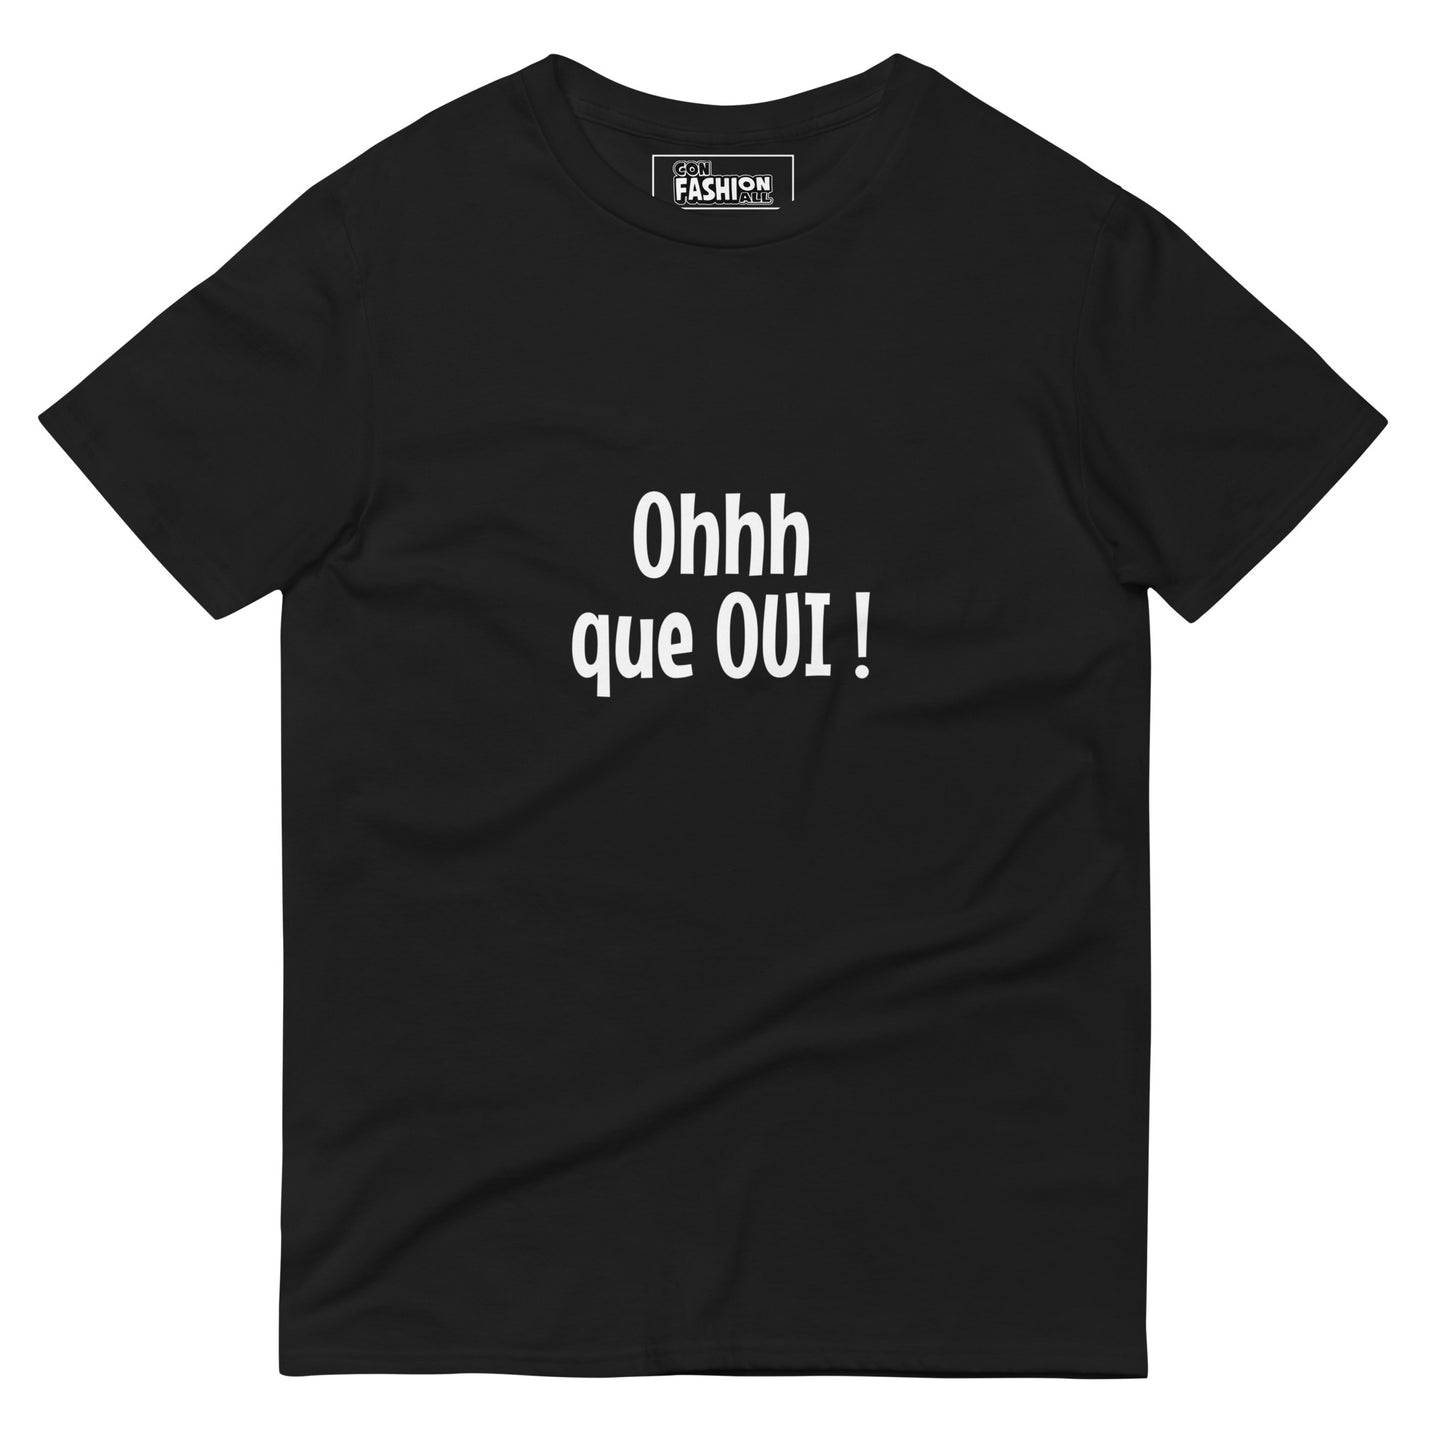 Ohhh que oui - T-shirt Homme